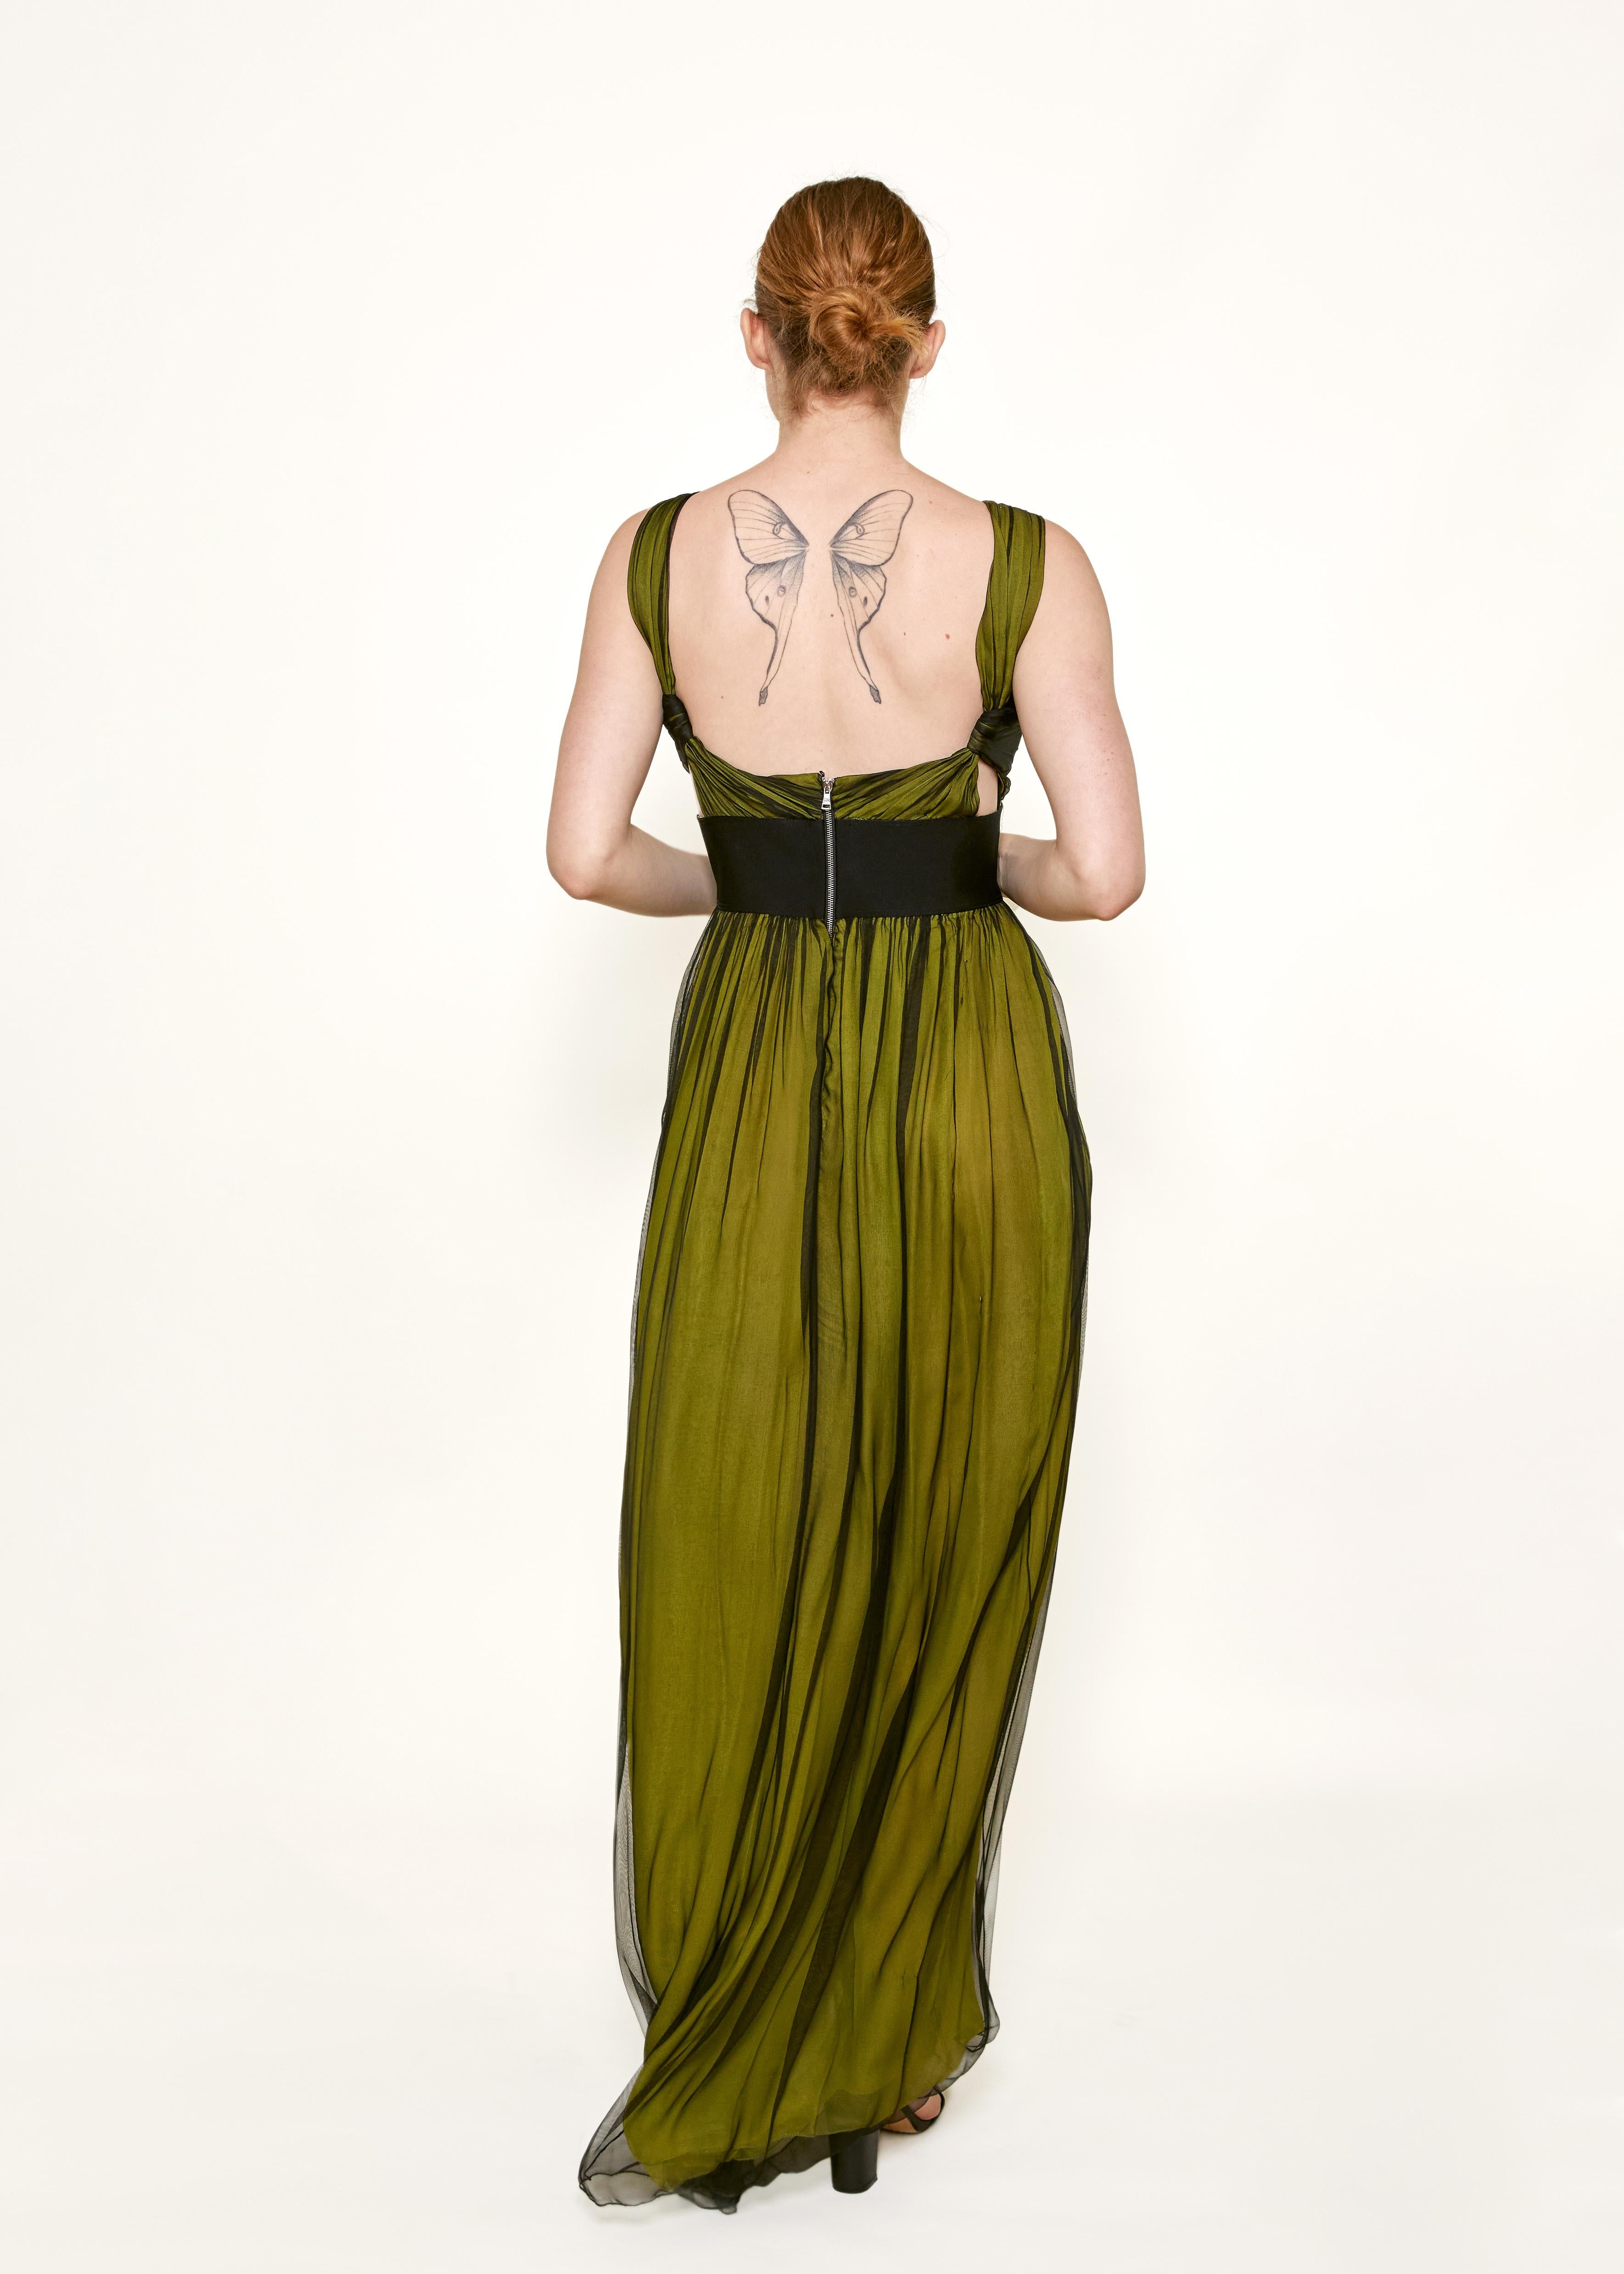 Dolce & Gabbana Green/Black Cross-Front Chiffon Gown For Sale 1